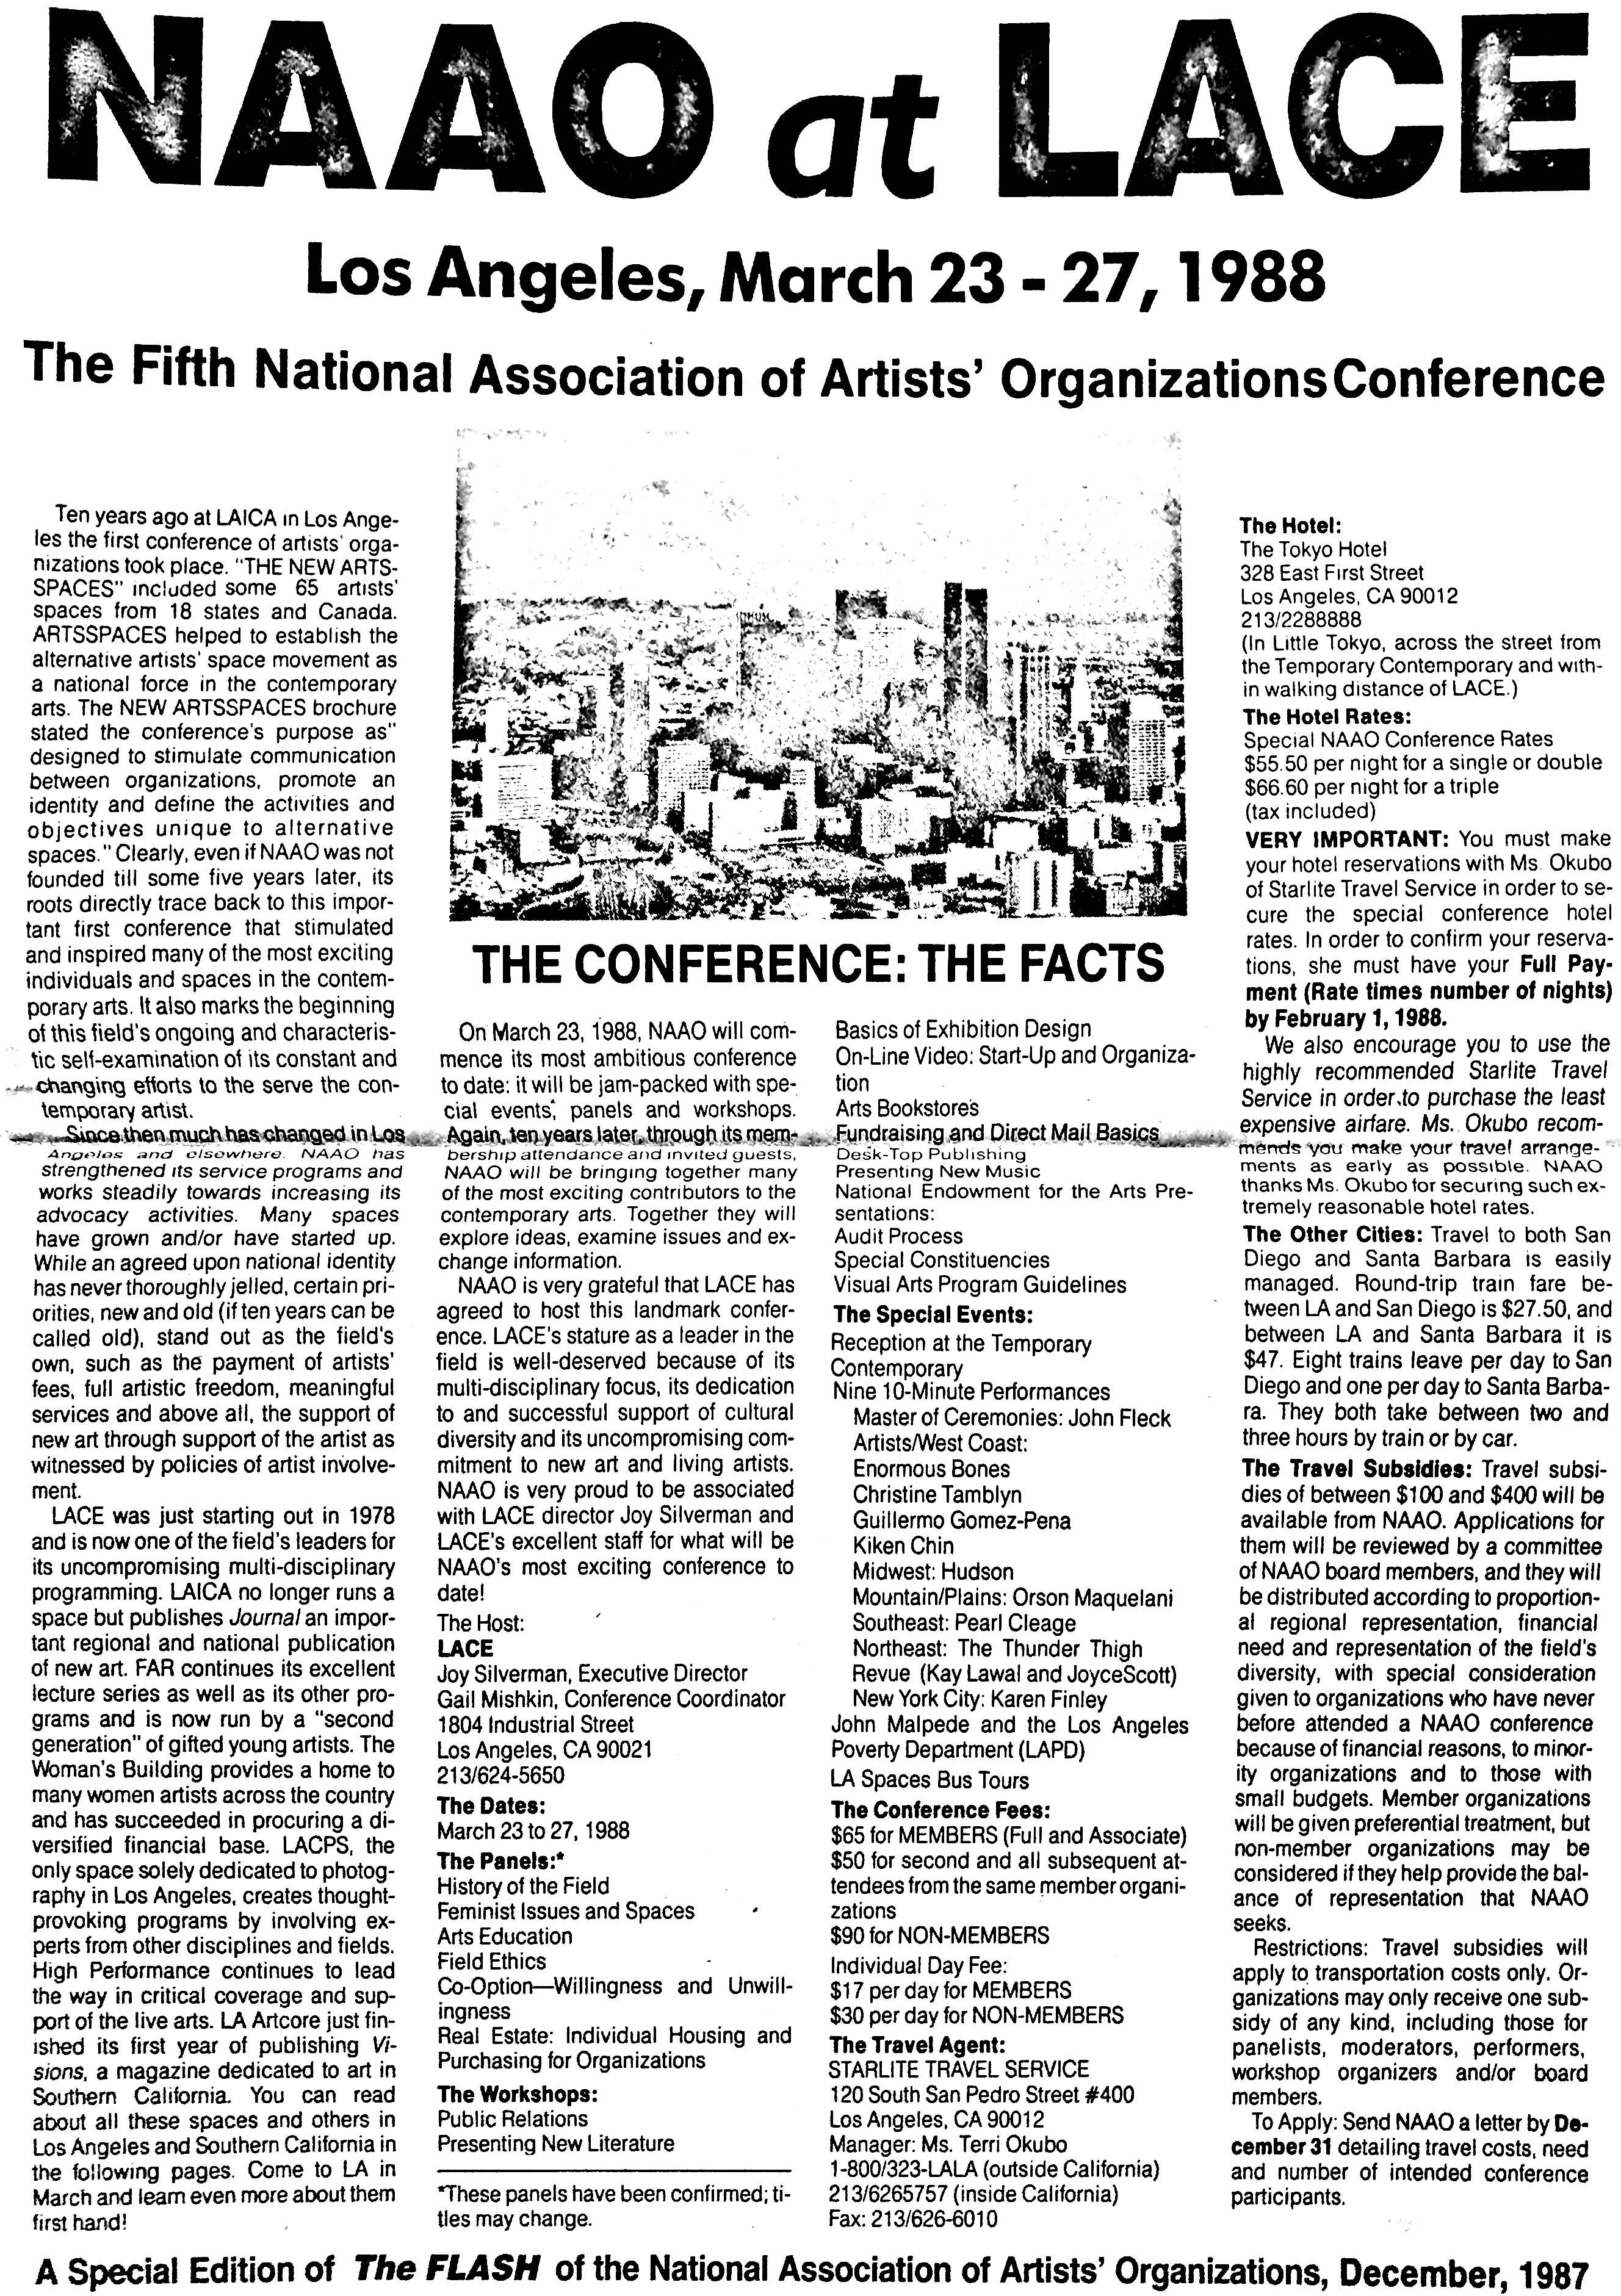 March 23-27, 1988 - NAAO at LACE  Page 2.jpg